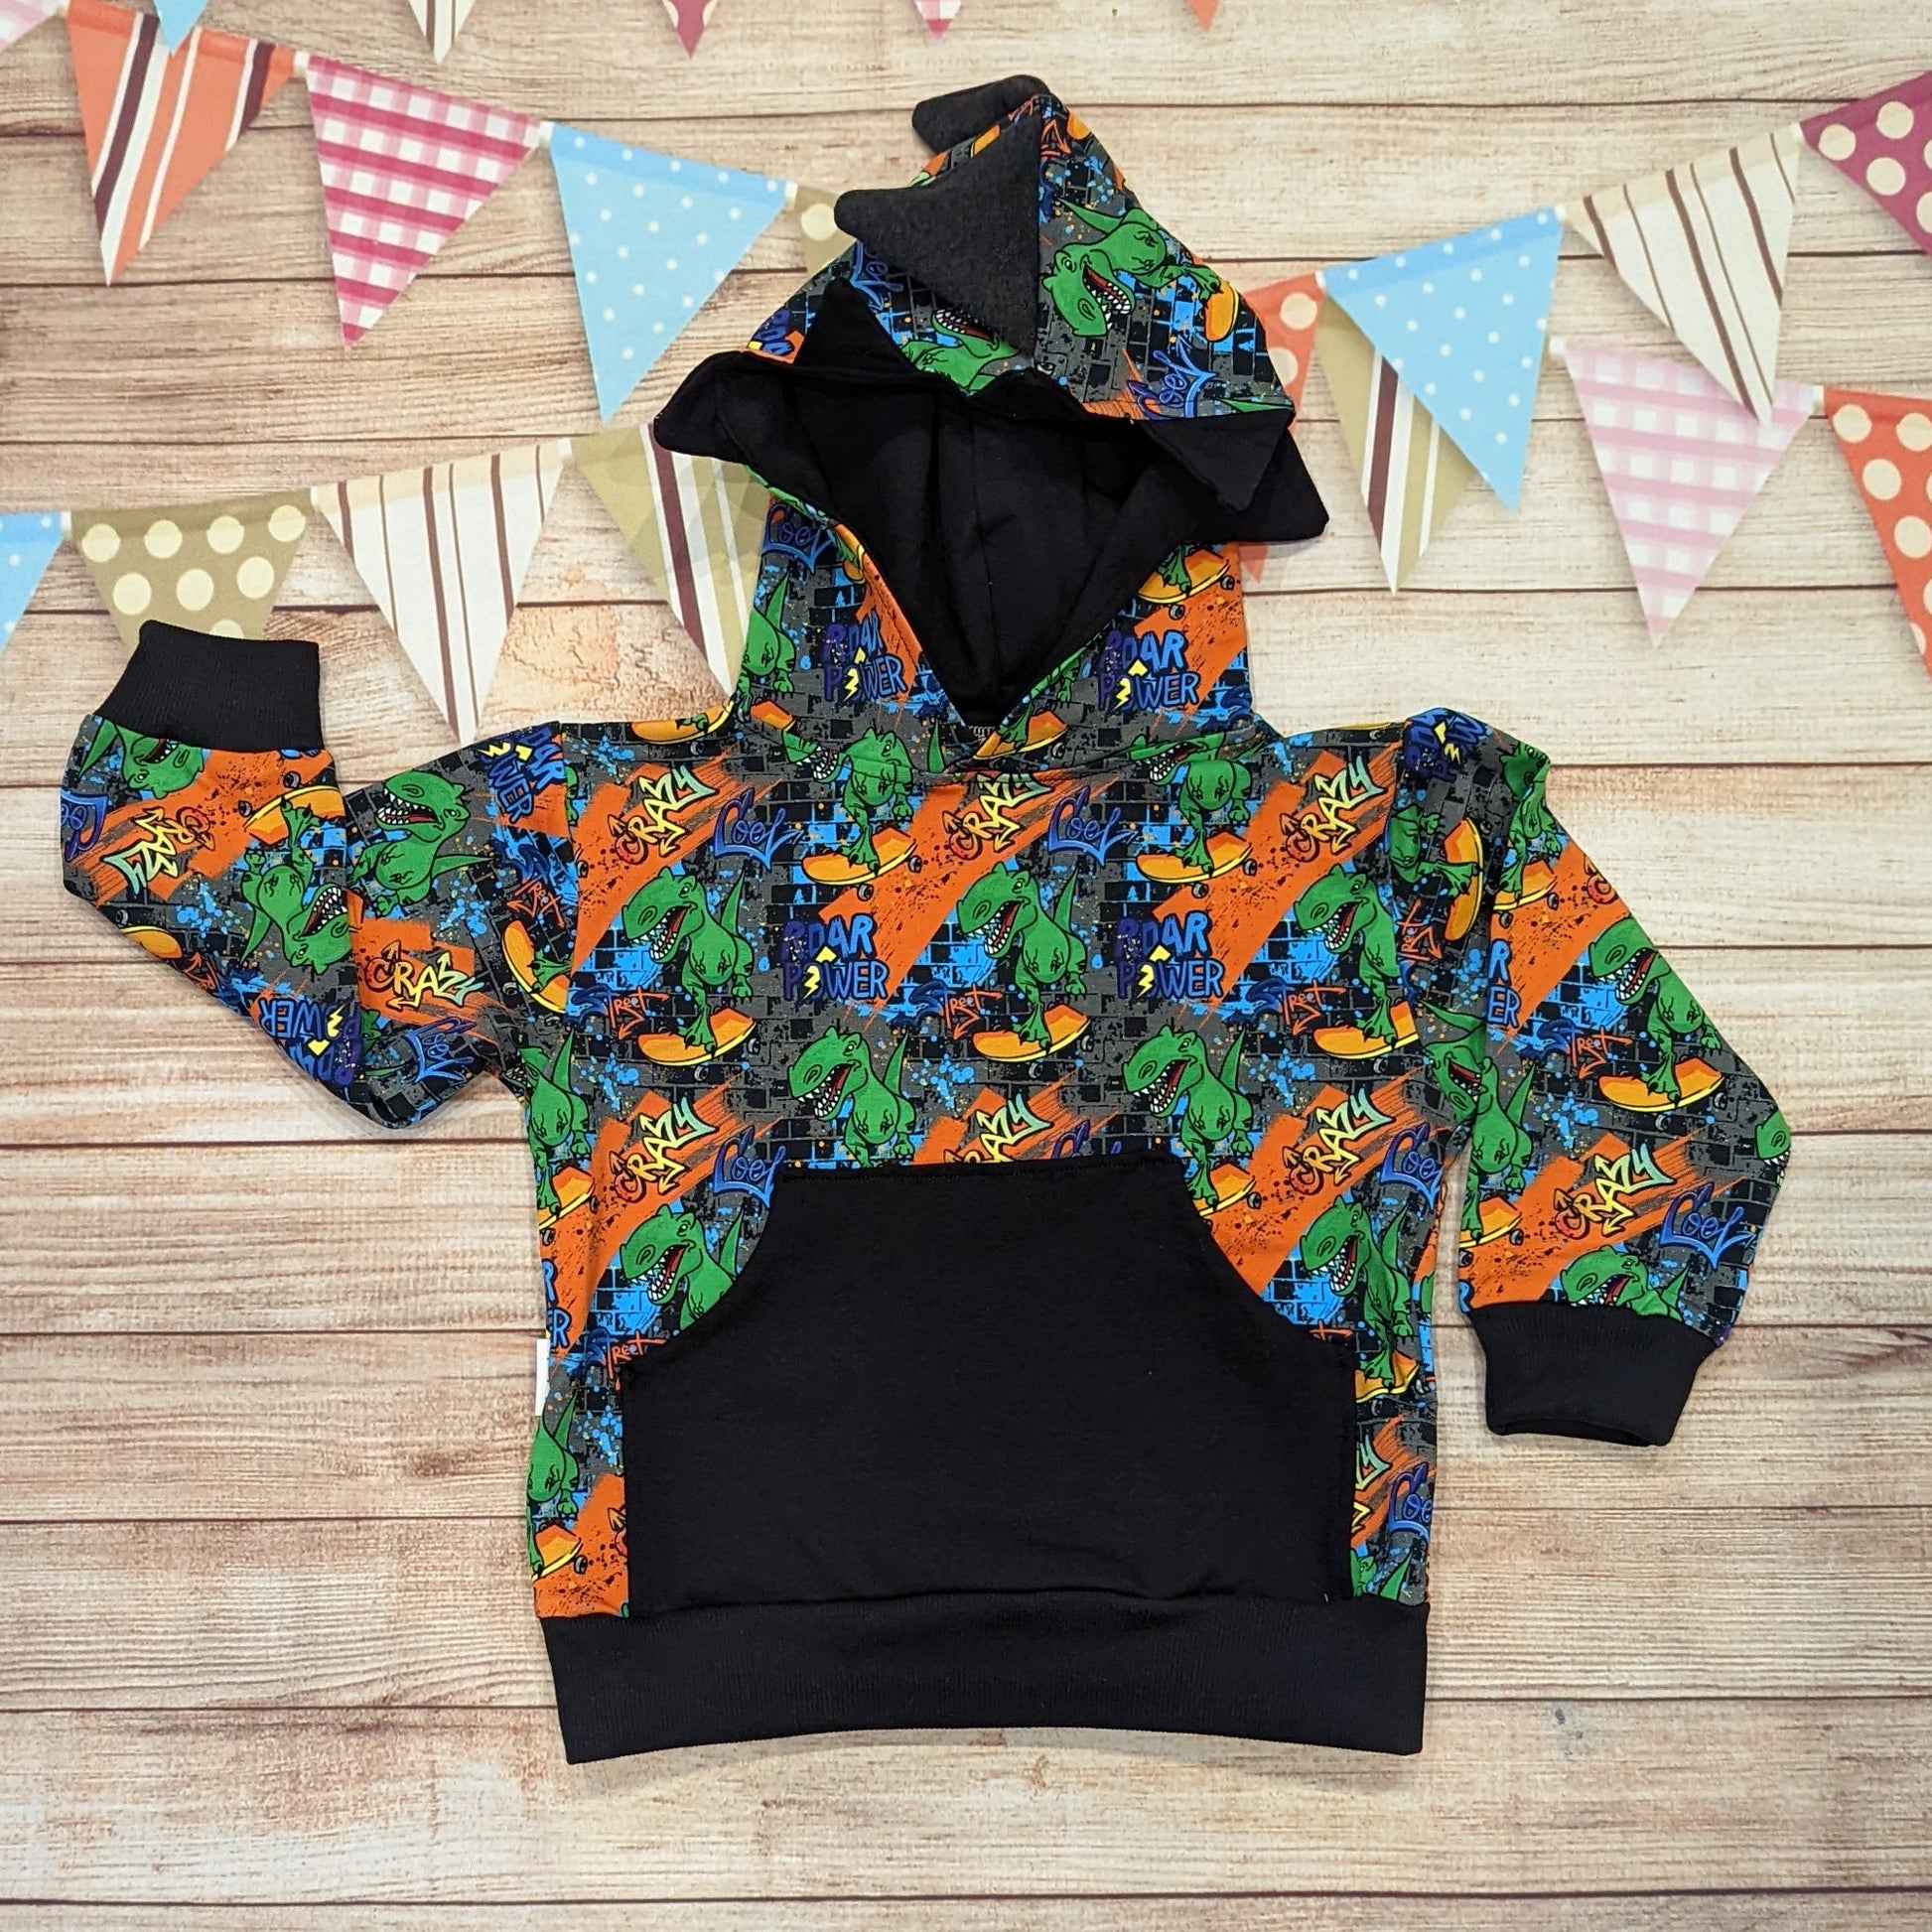 The Colourful and fun skateboarding dinosaur hoodie. Handmade using cool street dino cotton French terry, black cotton Jersey and graphite cotton ribbing. With spines and teeth on the hood and a contrasting front pocket.